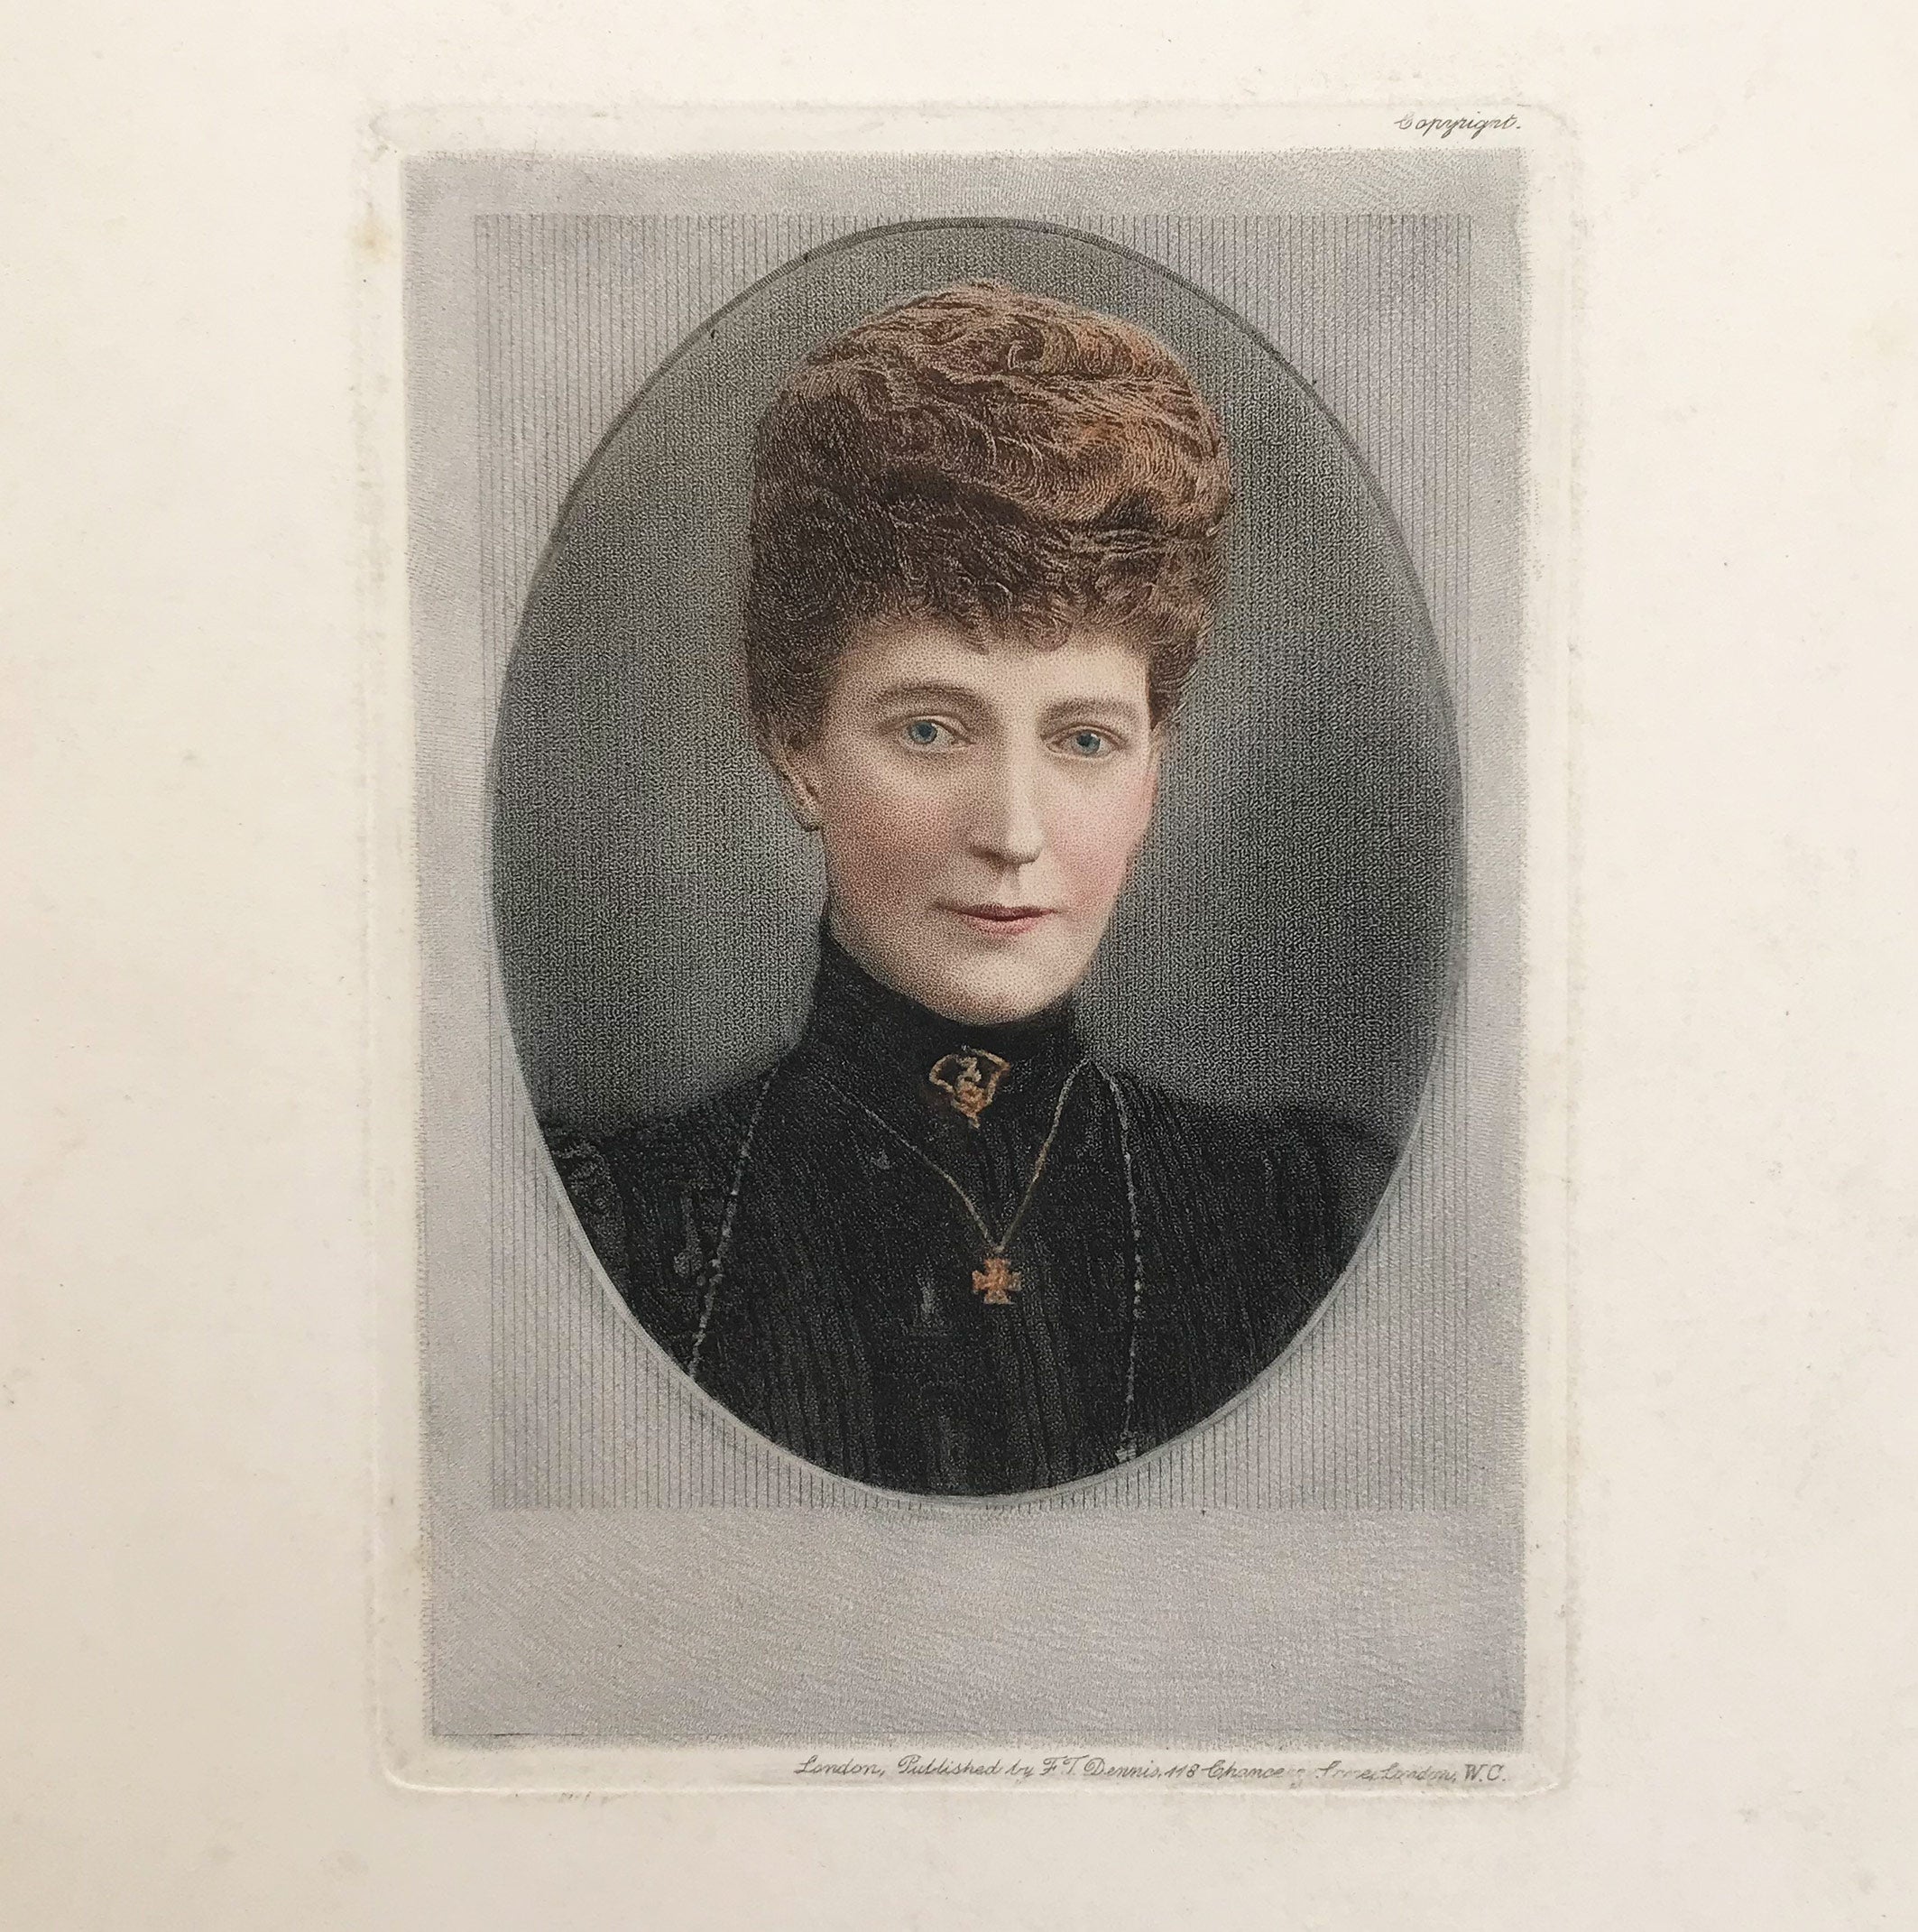 Period Engraving of an Edwardian Lady. Published by F.T Dennis. Find Antique Etchings & other Antique Prints at IntoVintage.co.uk